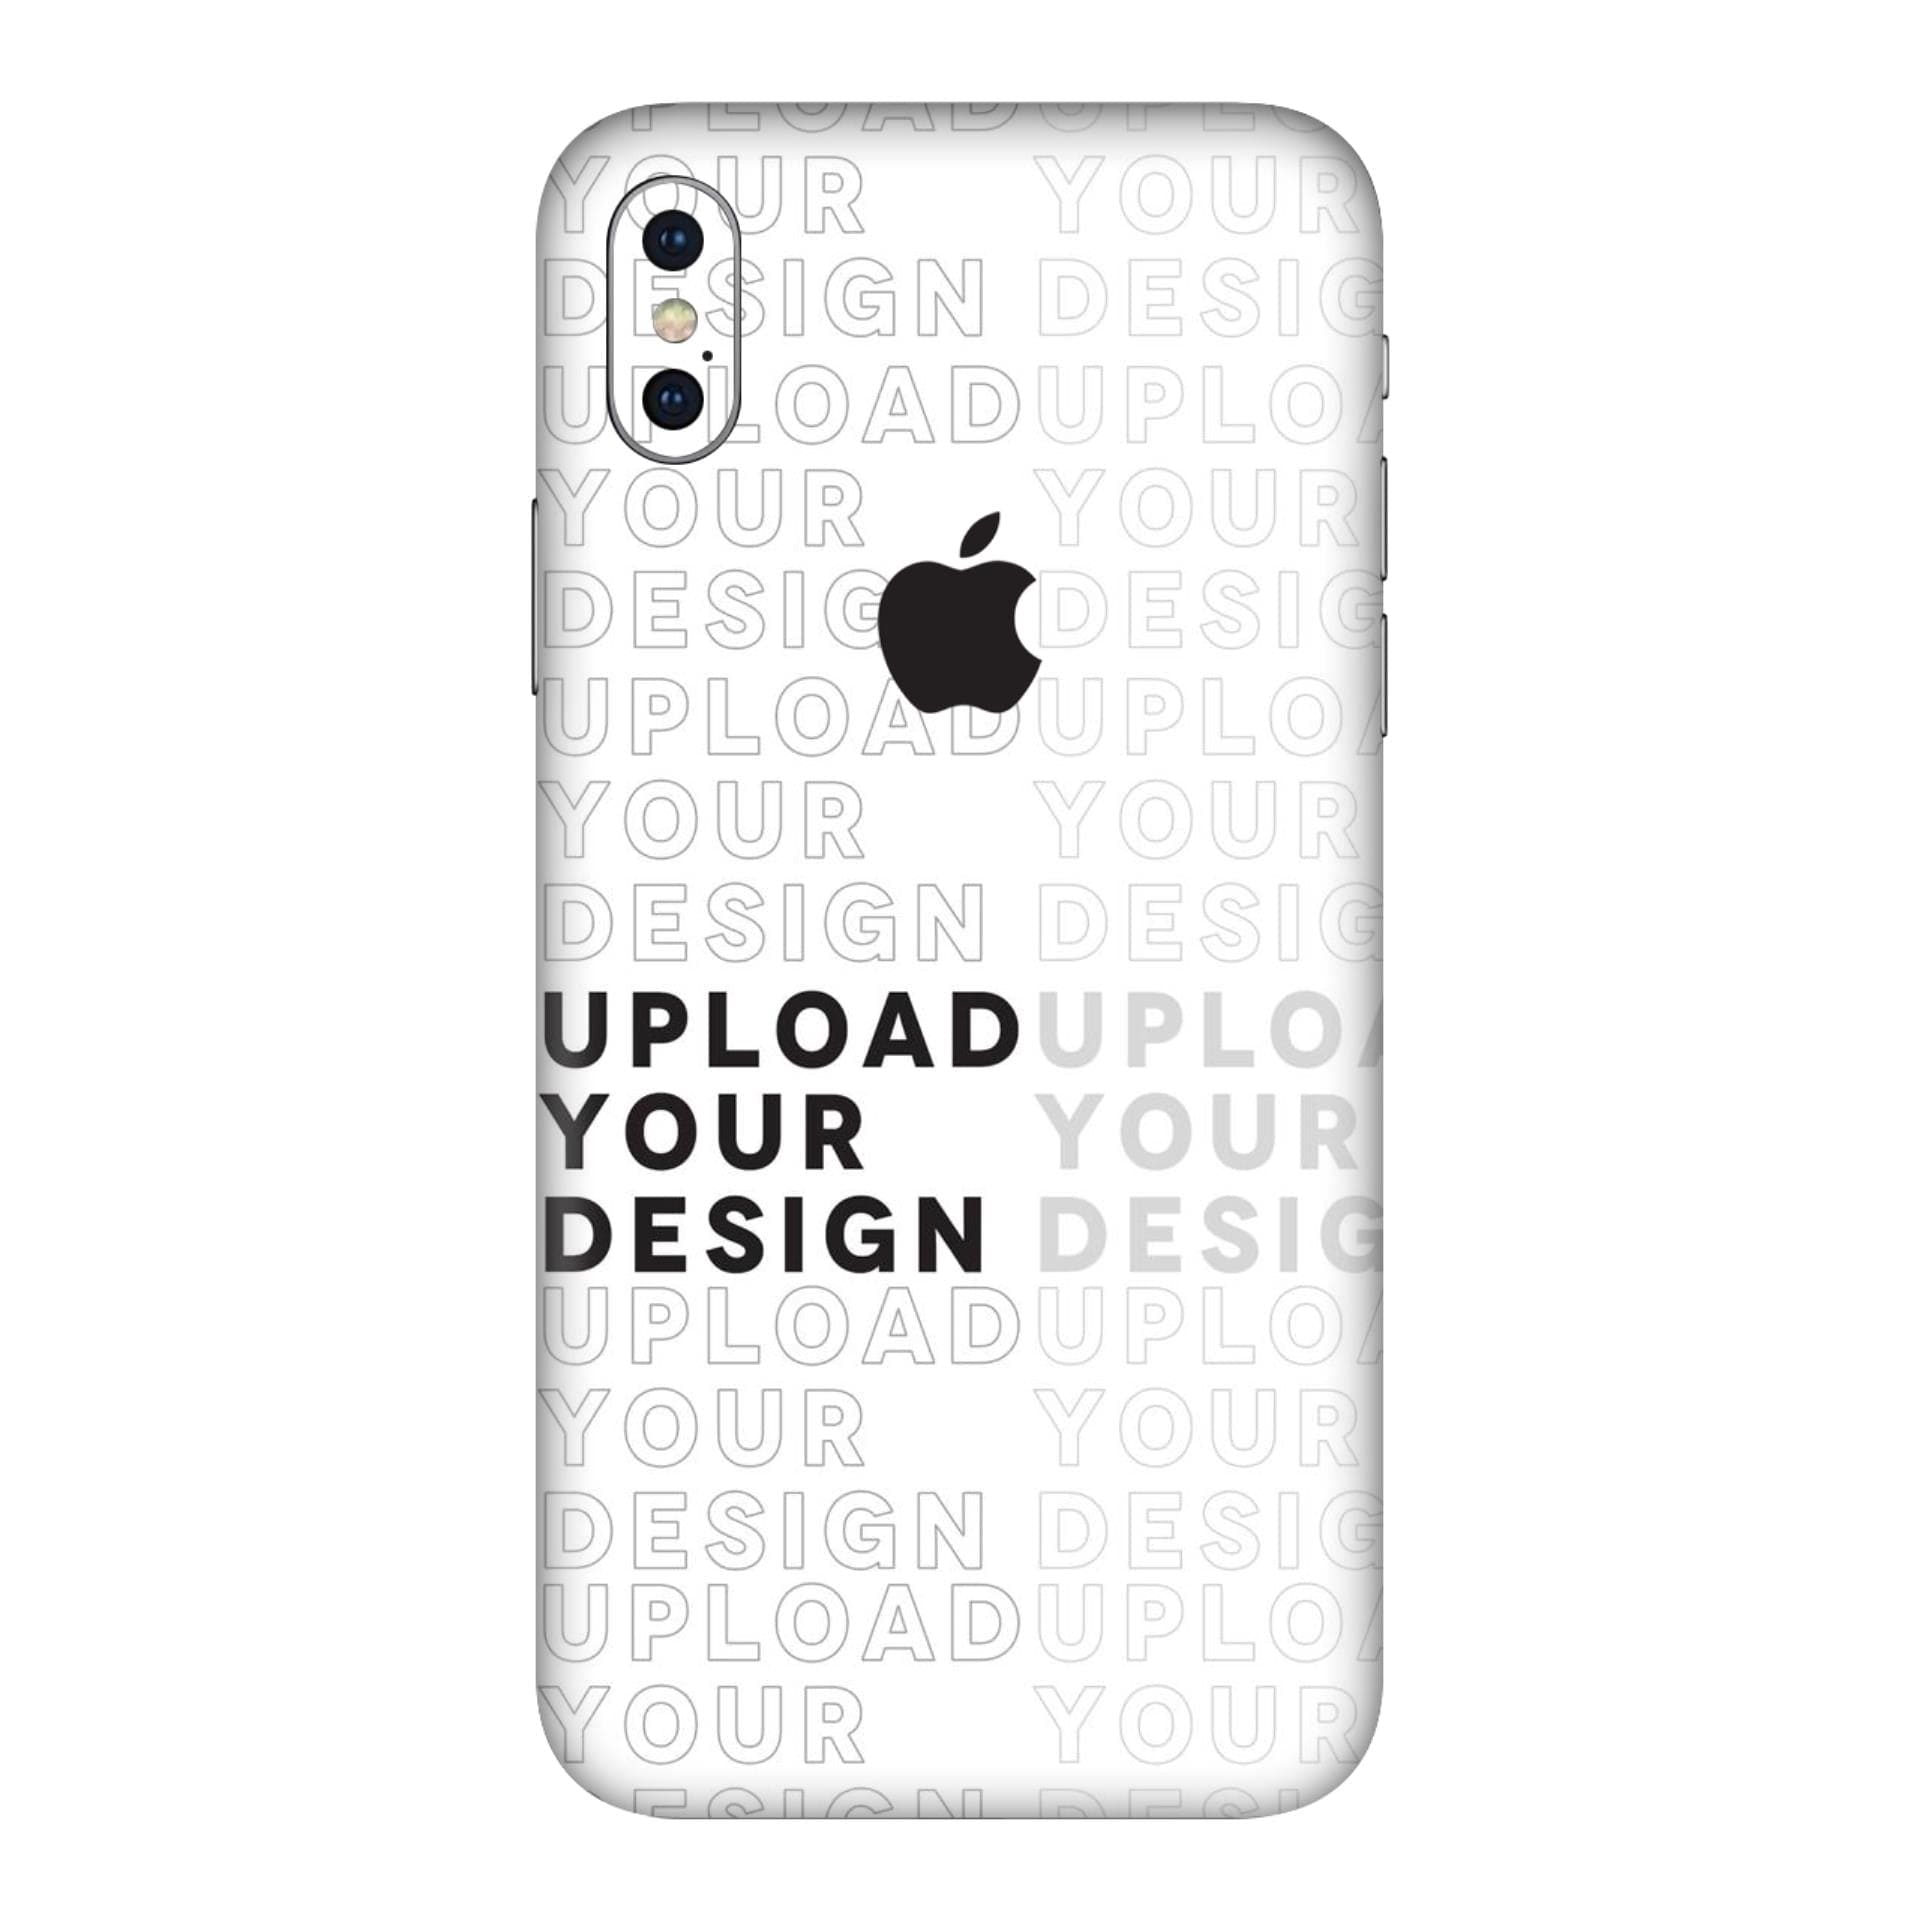 iphone XS UPLOAD YOUR OWN skins